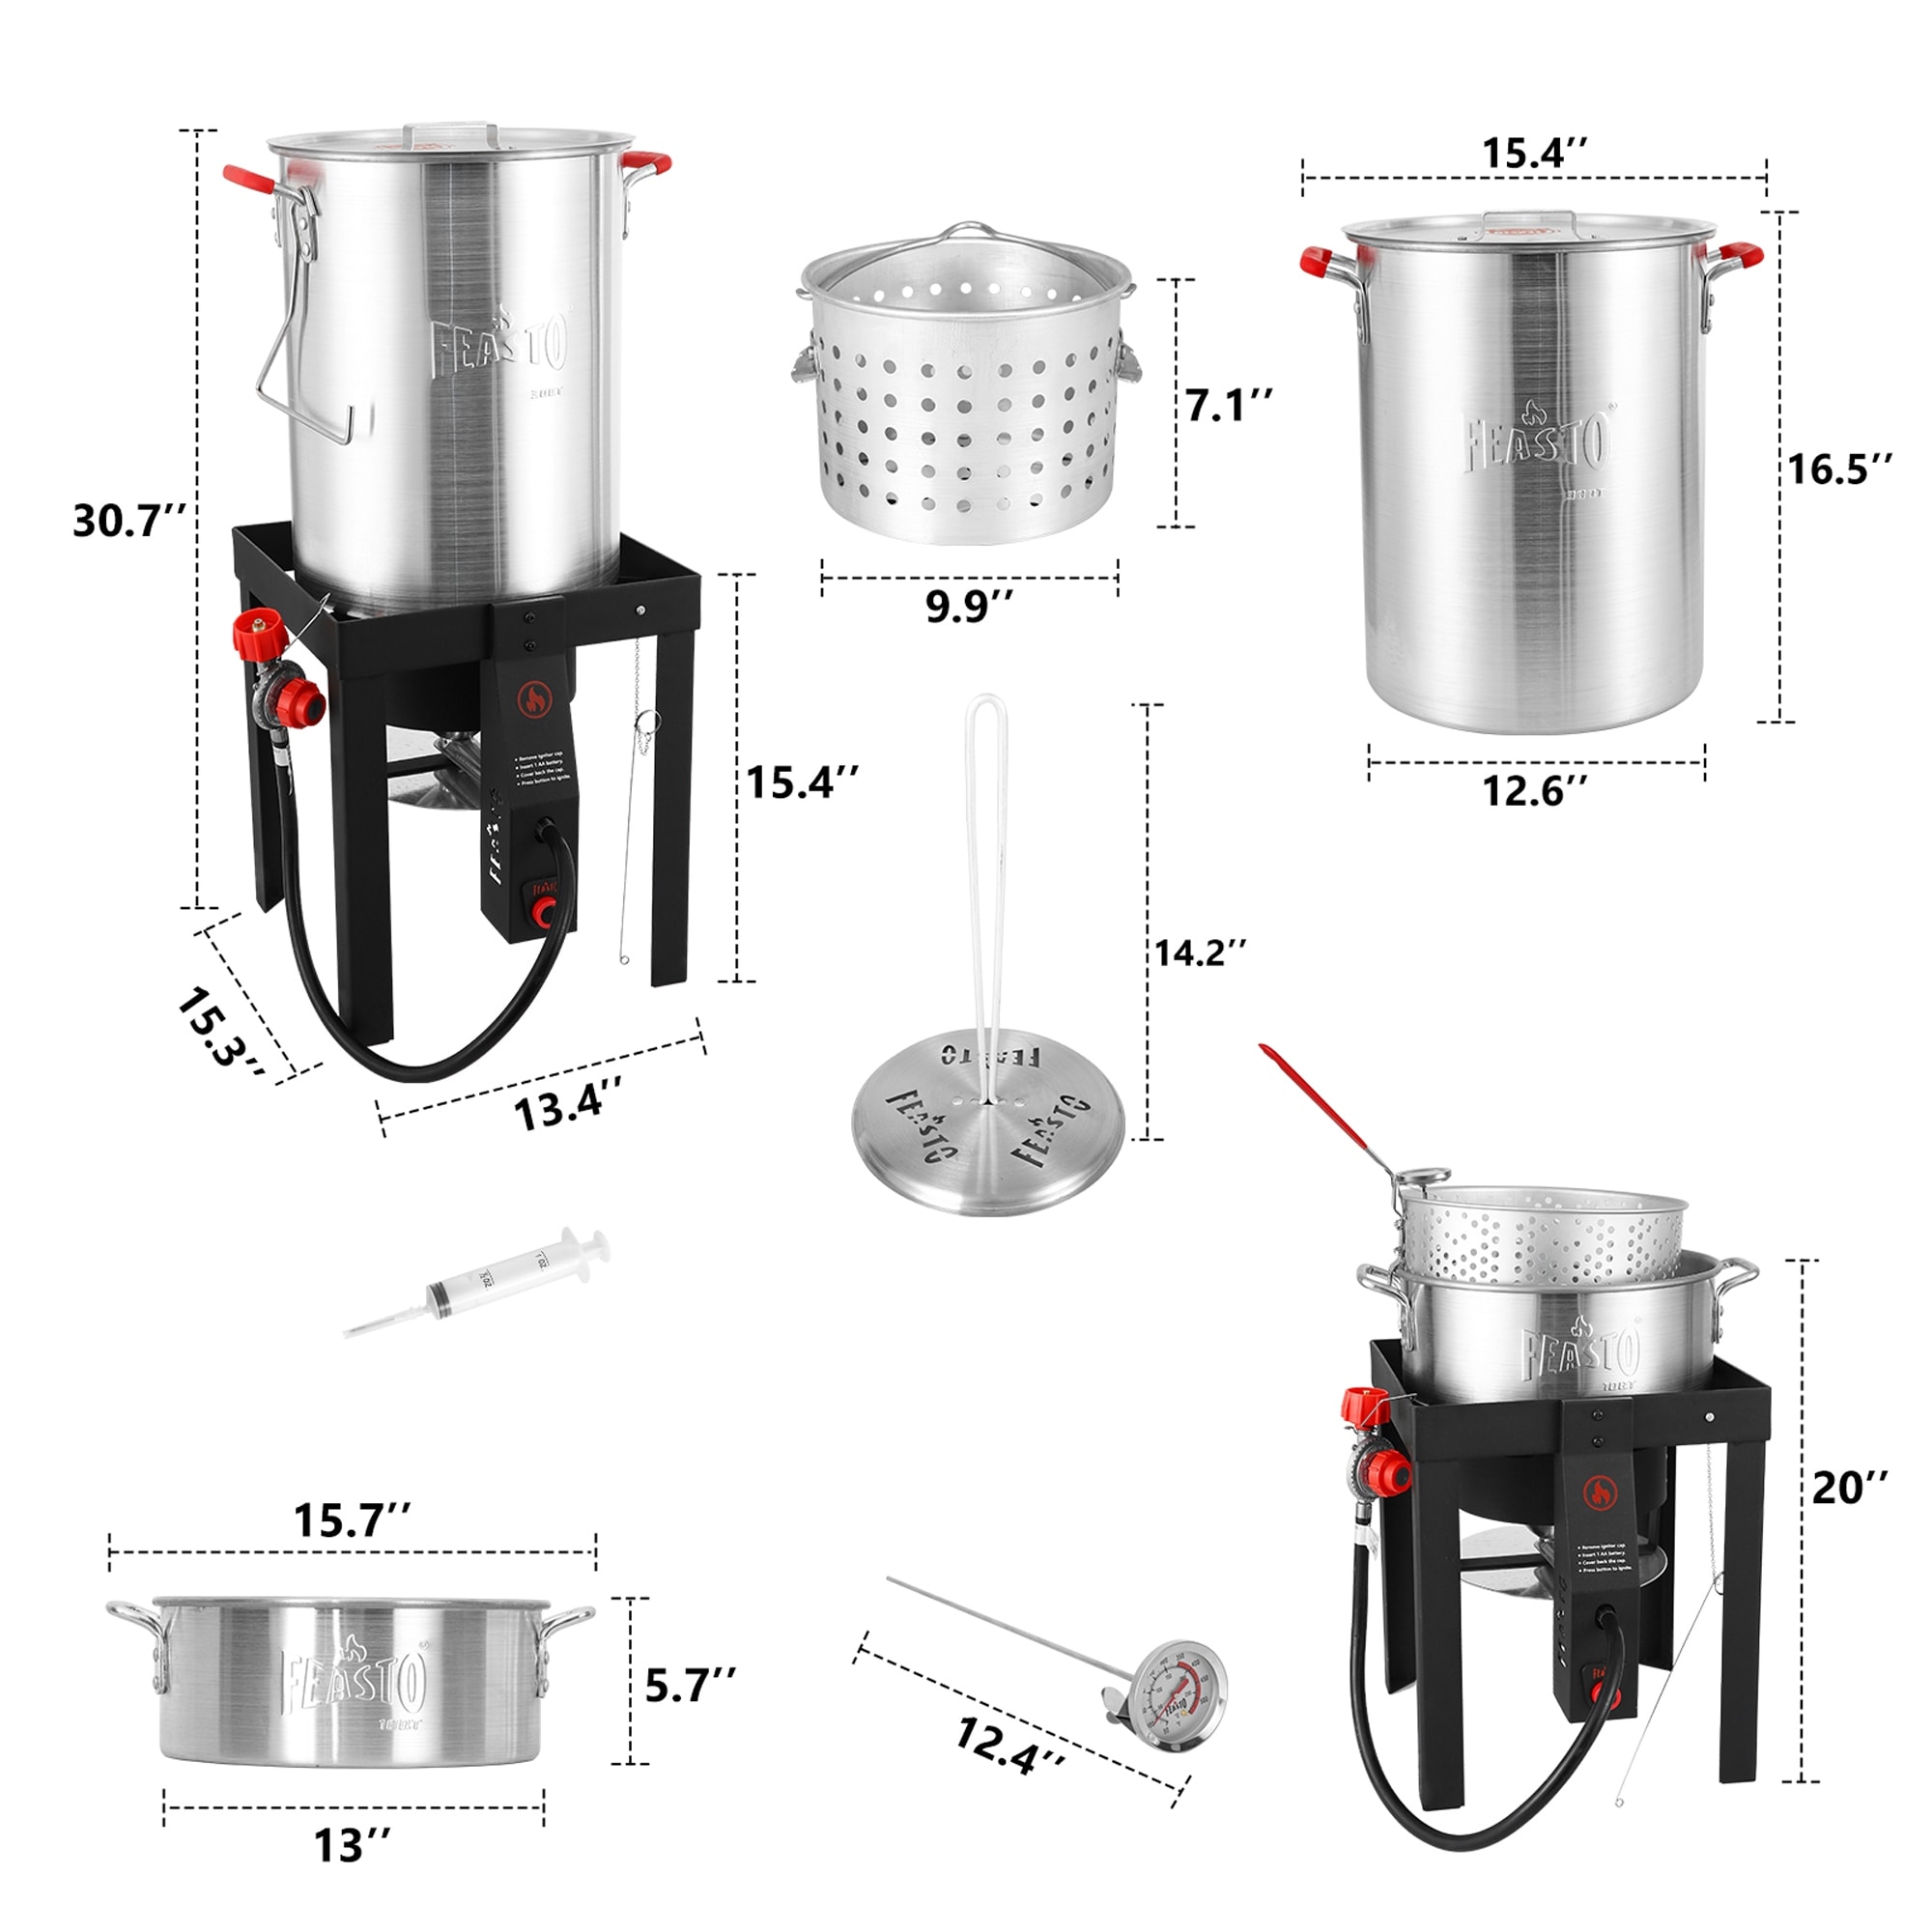 https://ak1.ostkcdn.com/images/products/is/images/direct/e83d984b5fa61b2c5162b76060e2587b80c5b432/FEASTO-30-QT-Turkey-Fryer-and-10-QT-Fish-Fryer-Set.jpg